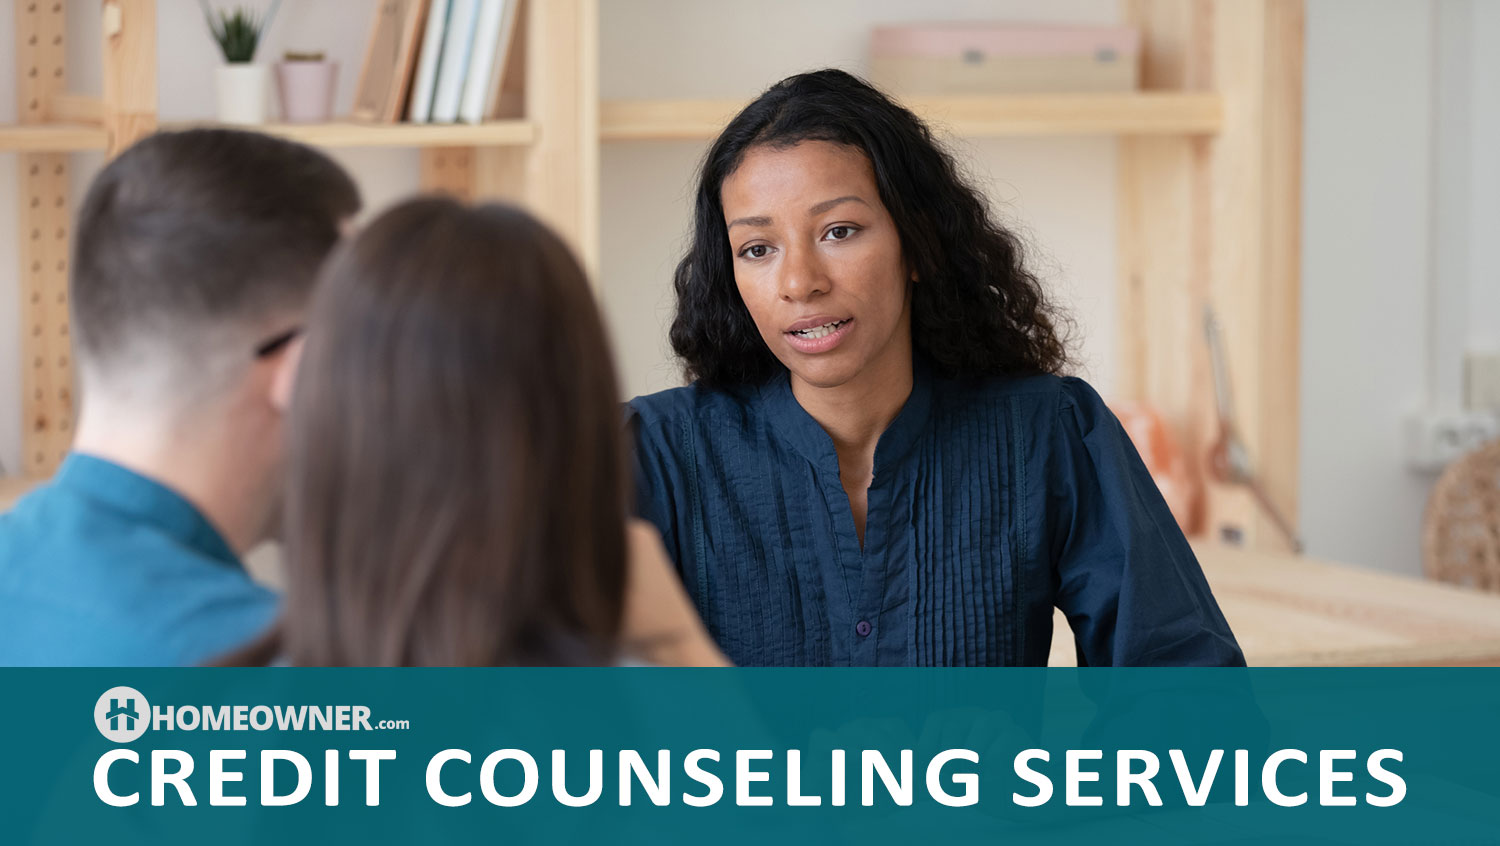 Best Credit Counseling Services in 2022